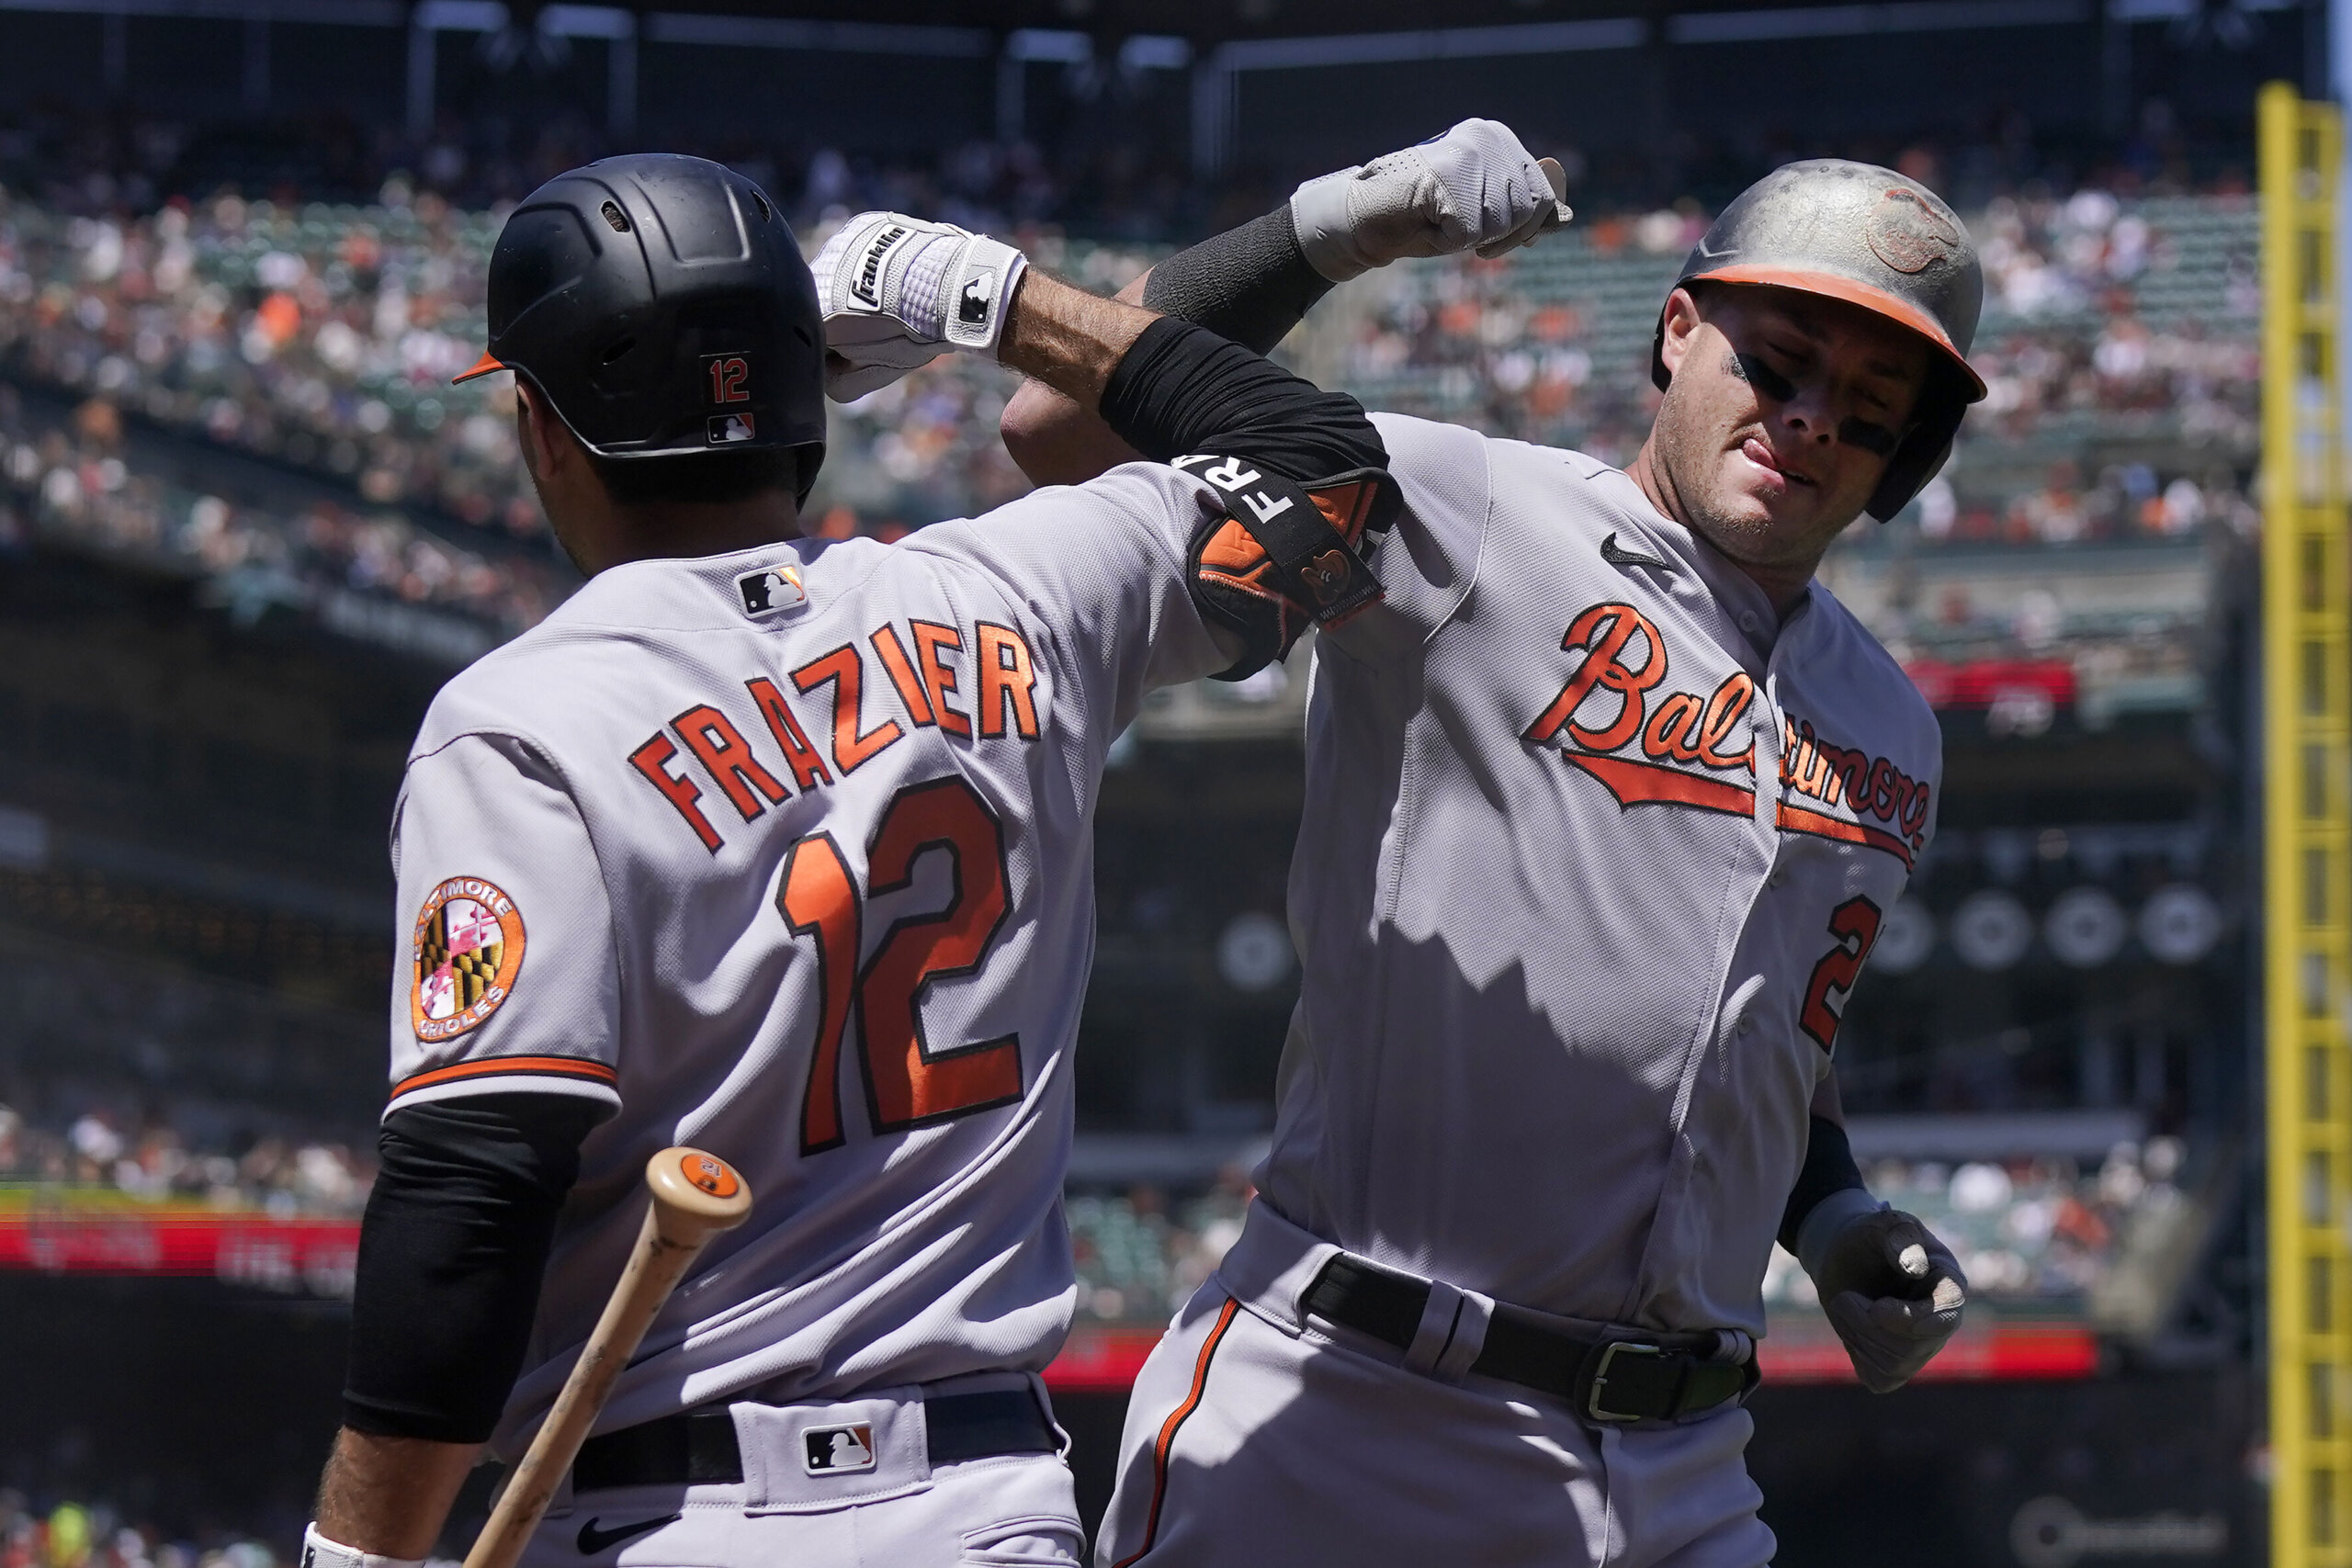 McCann is activated from the injured list by the Orioles after recovering  from a sprained ankle - WTOP News